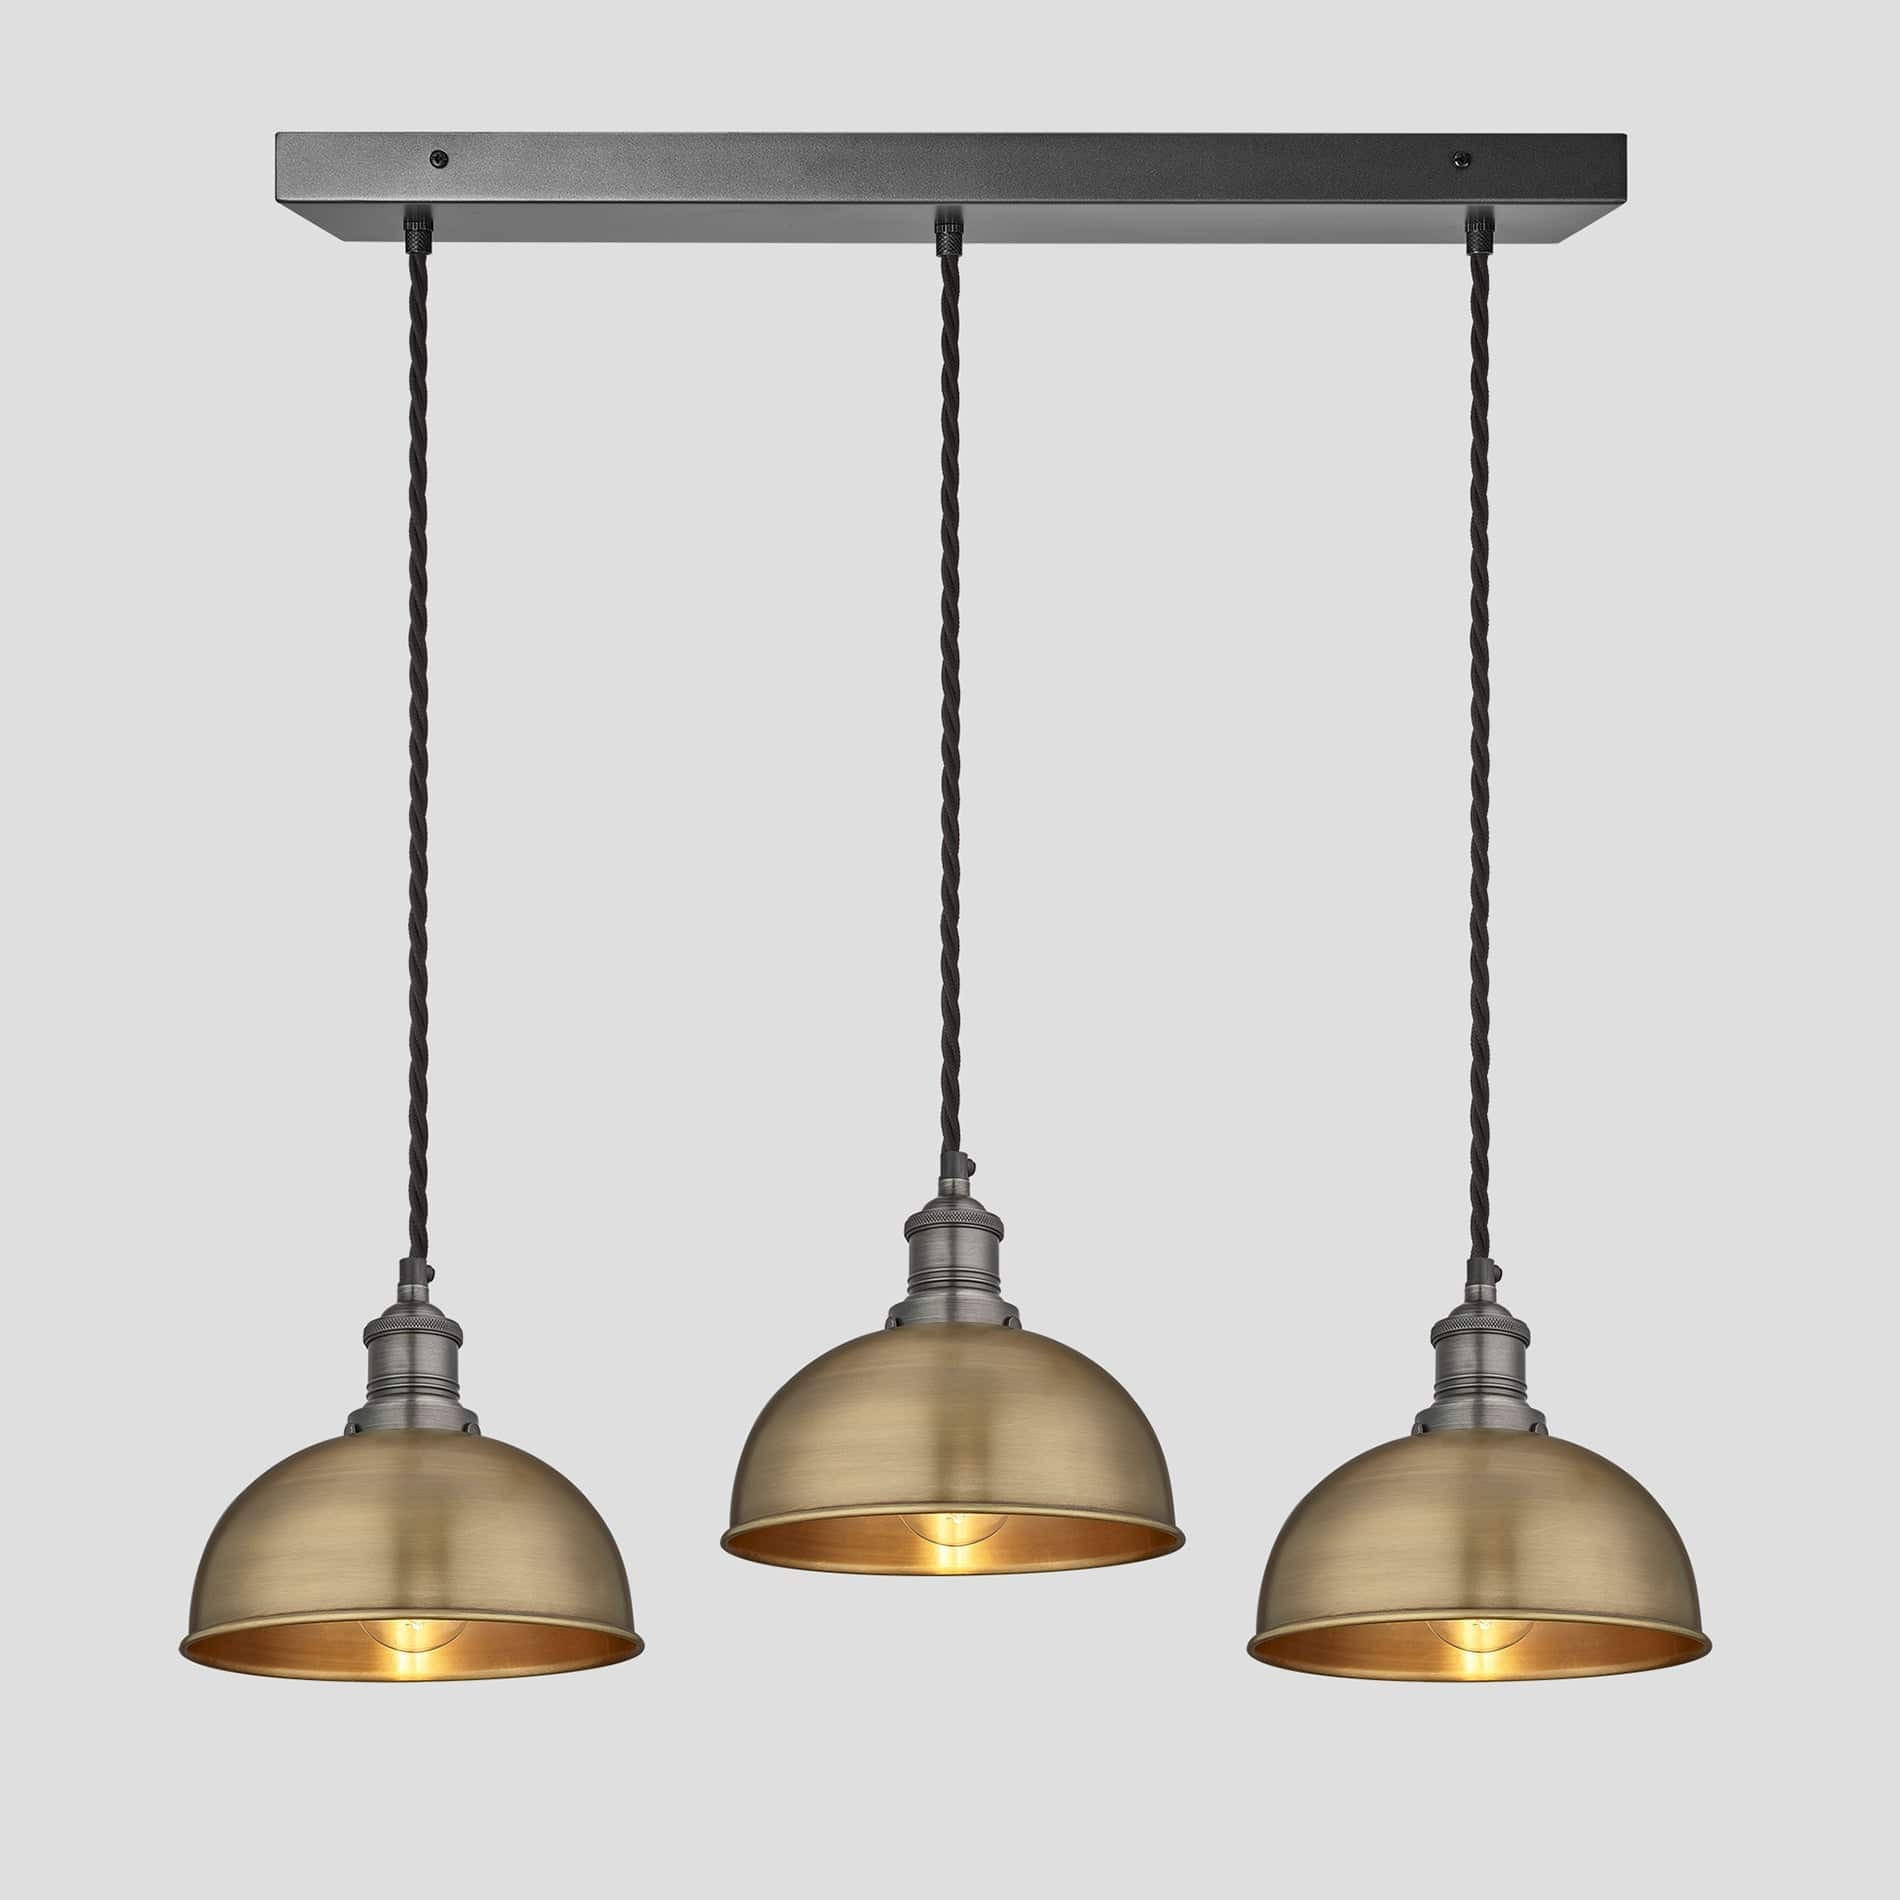 Brooklyn Dome 3 Wire Cluster Lights - 8 inch - Brass